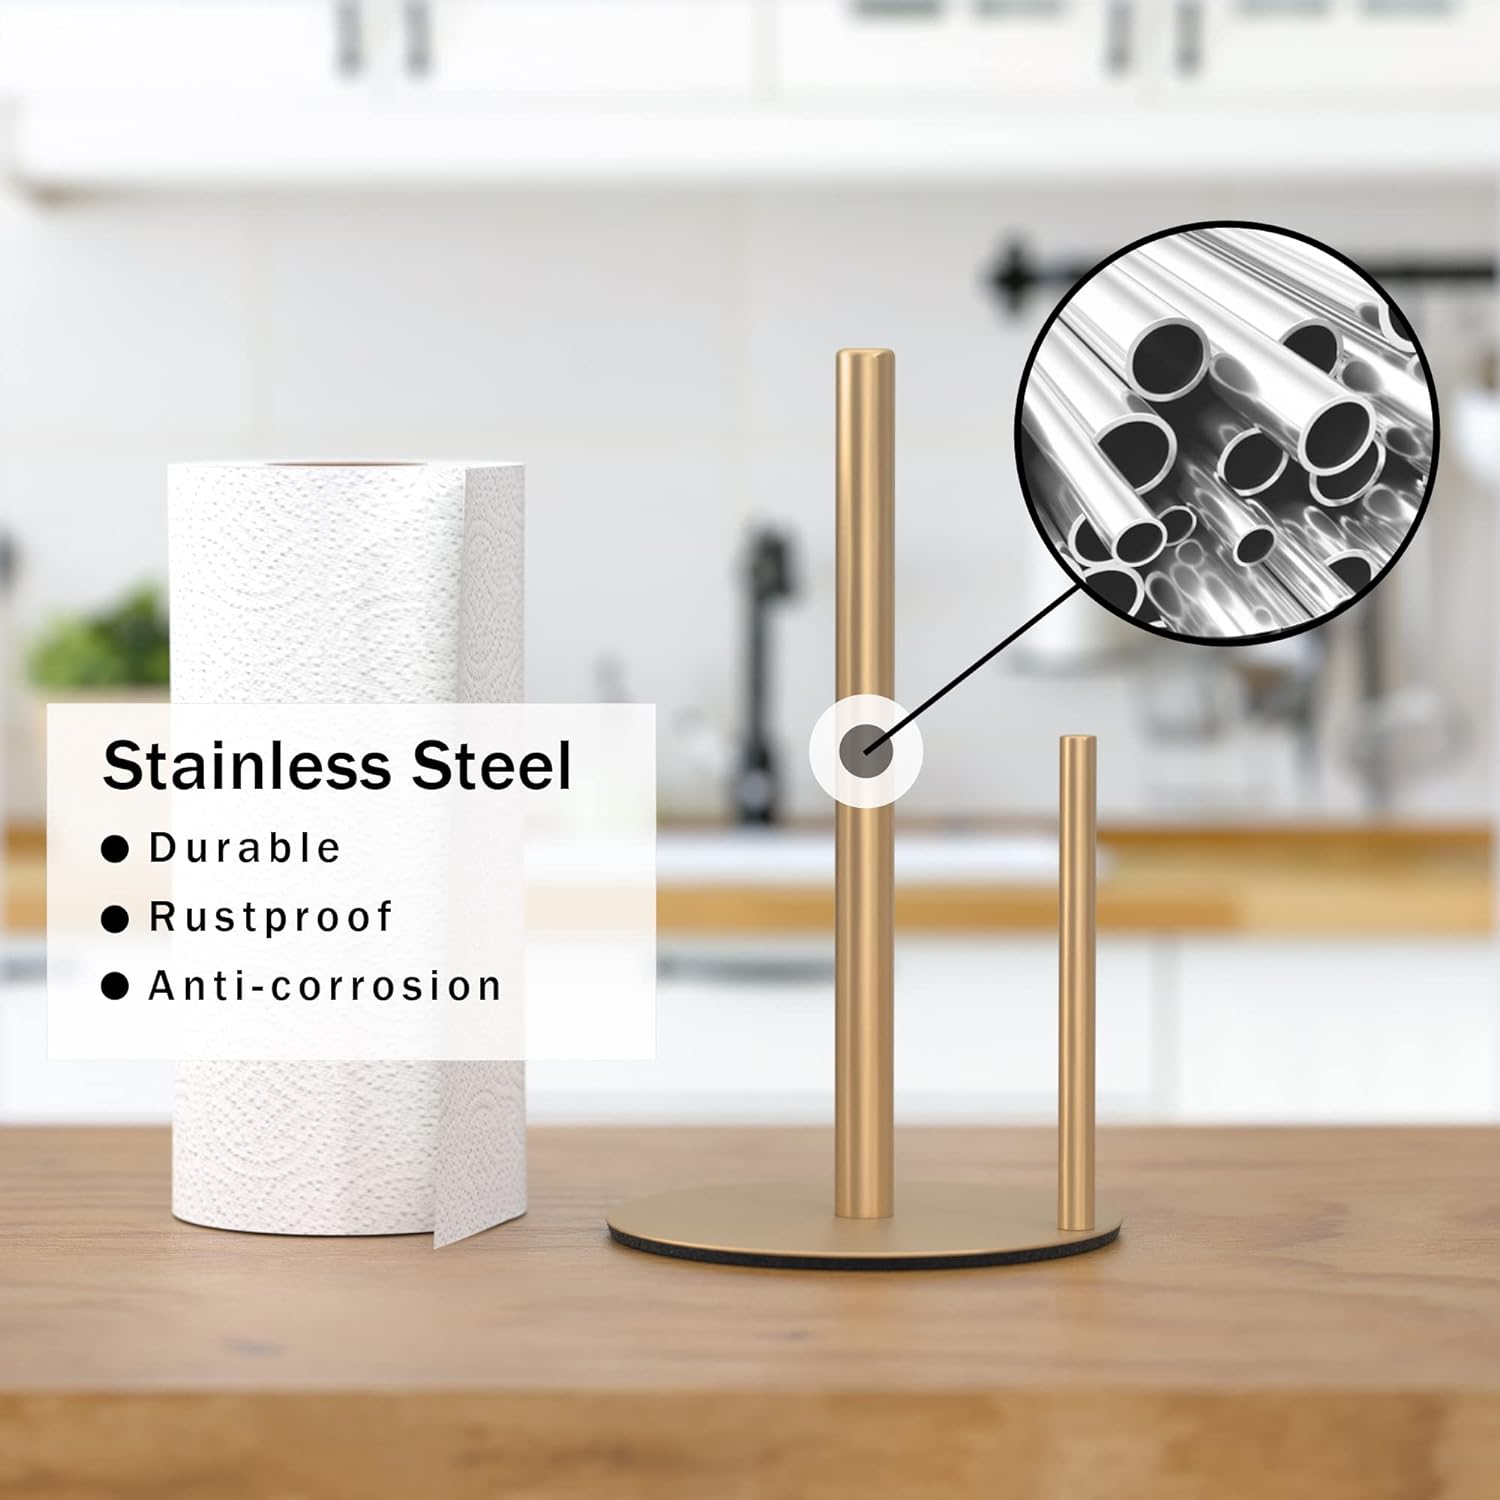 Wholesale prices with free shipping all over United States Paper Towel Holder Black Kitchen Roll Holder, Premium Stainless Steel, One-Handed Operation Countertop Dispenser with Weighted Base - Steven Deals